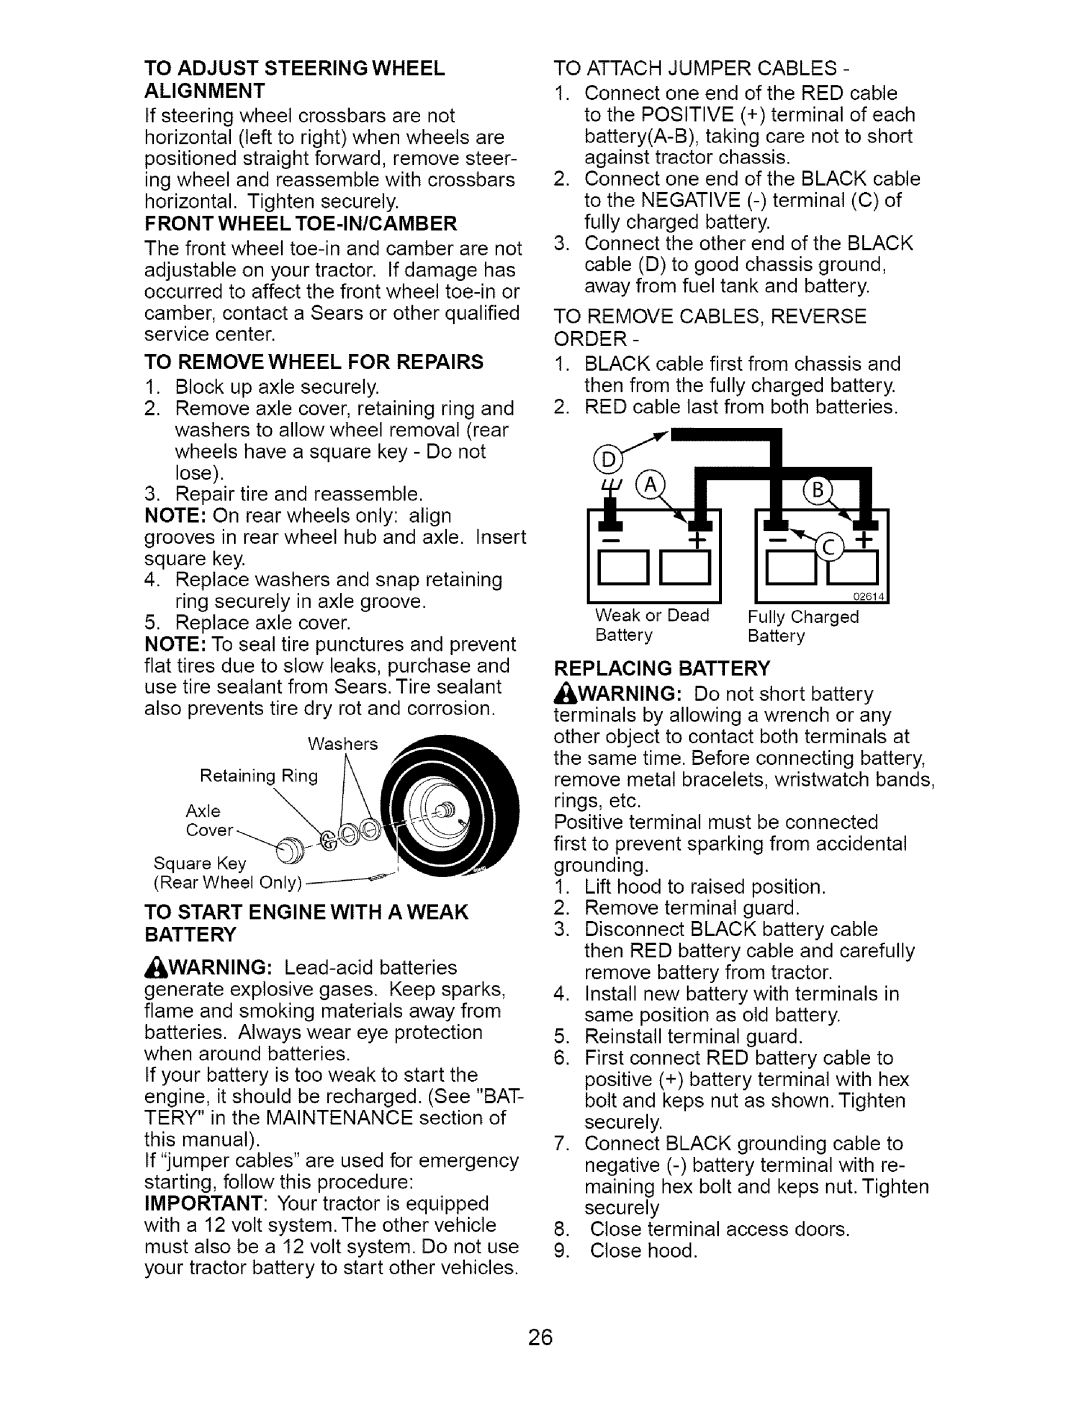 Craftsman 917.273642 manual To Adjust Steering Wheel Alignment, To Remove Wheel For Repairs, Replacing, Battery 